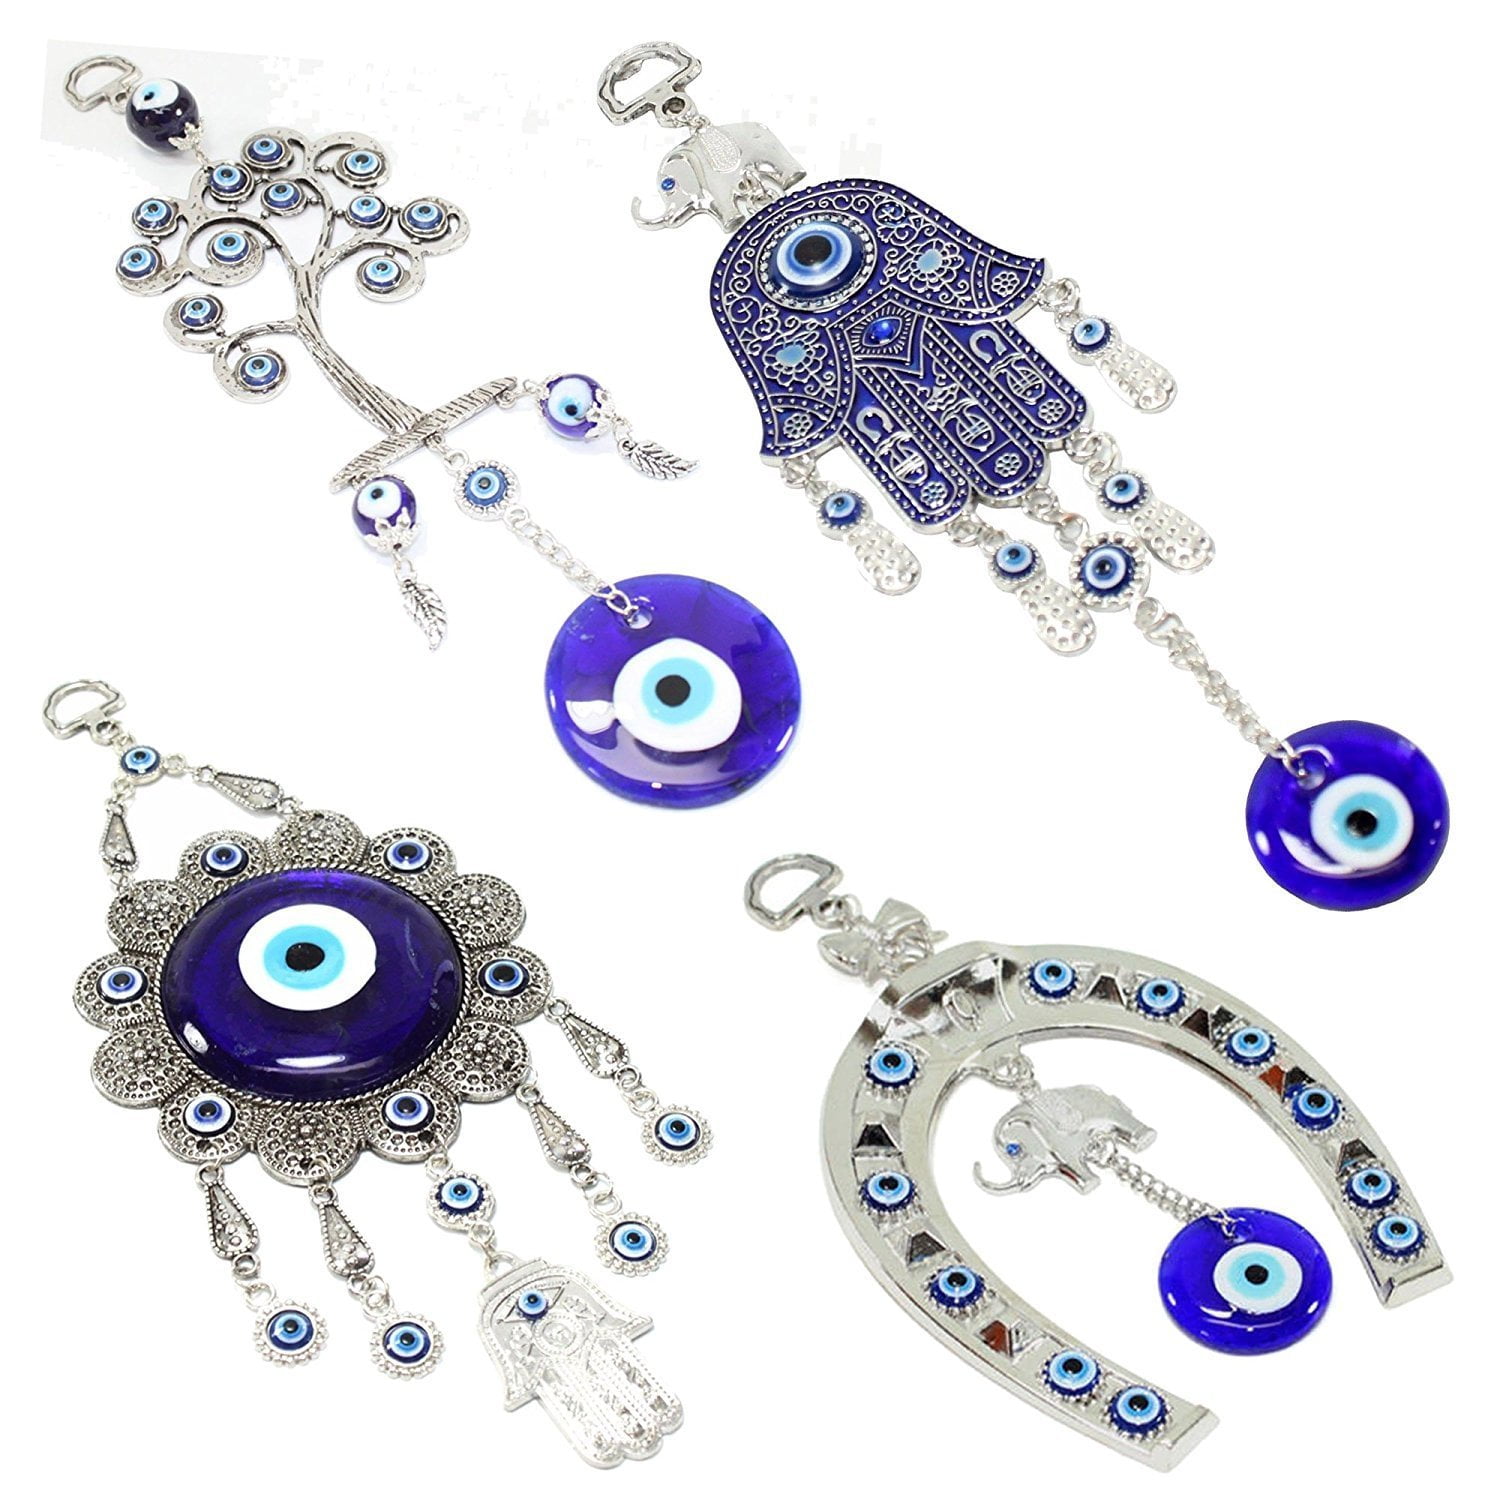 2.5 Inches Blue Evil Eye Wall Hanging Amulet/Charm to Protect Persons from Envious Looks